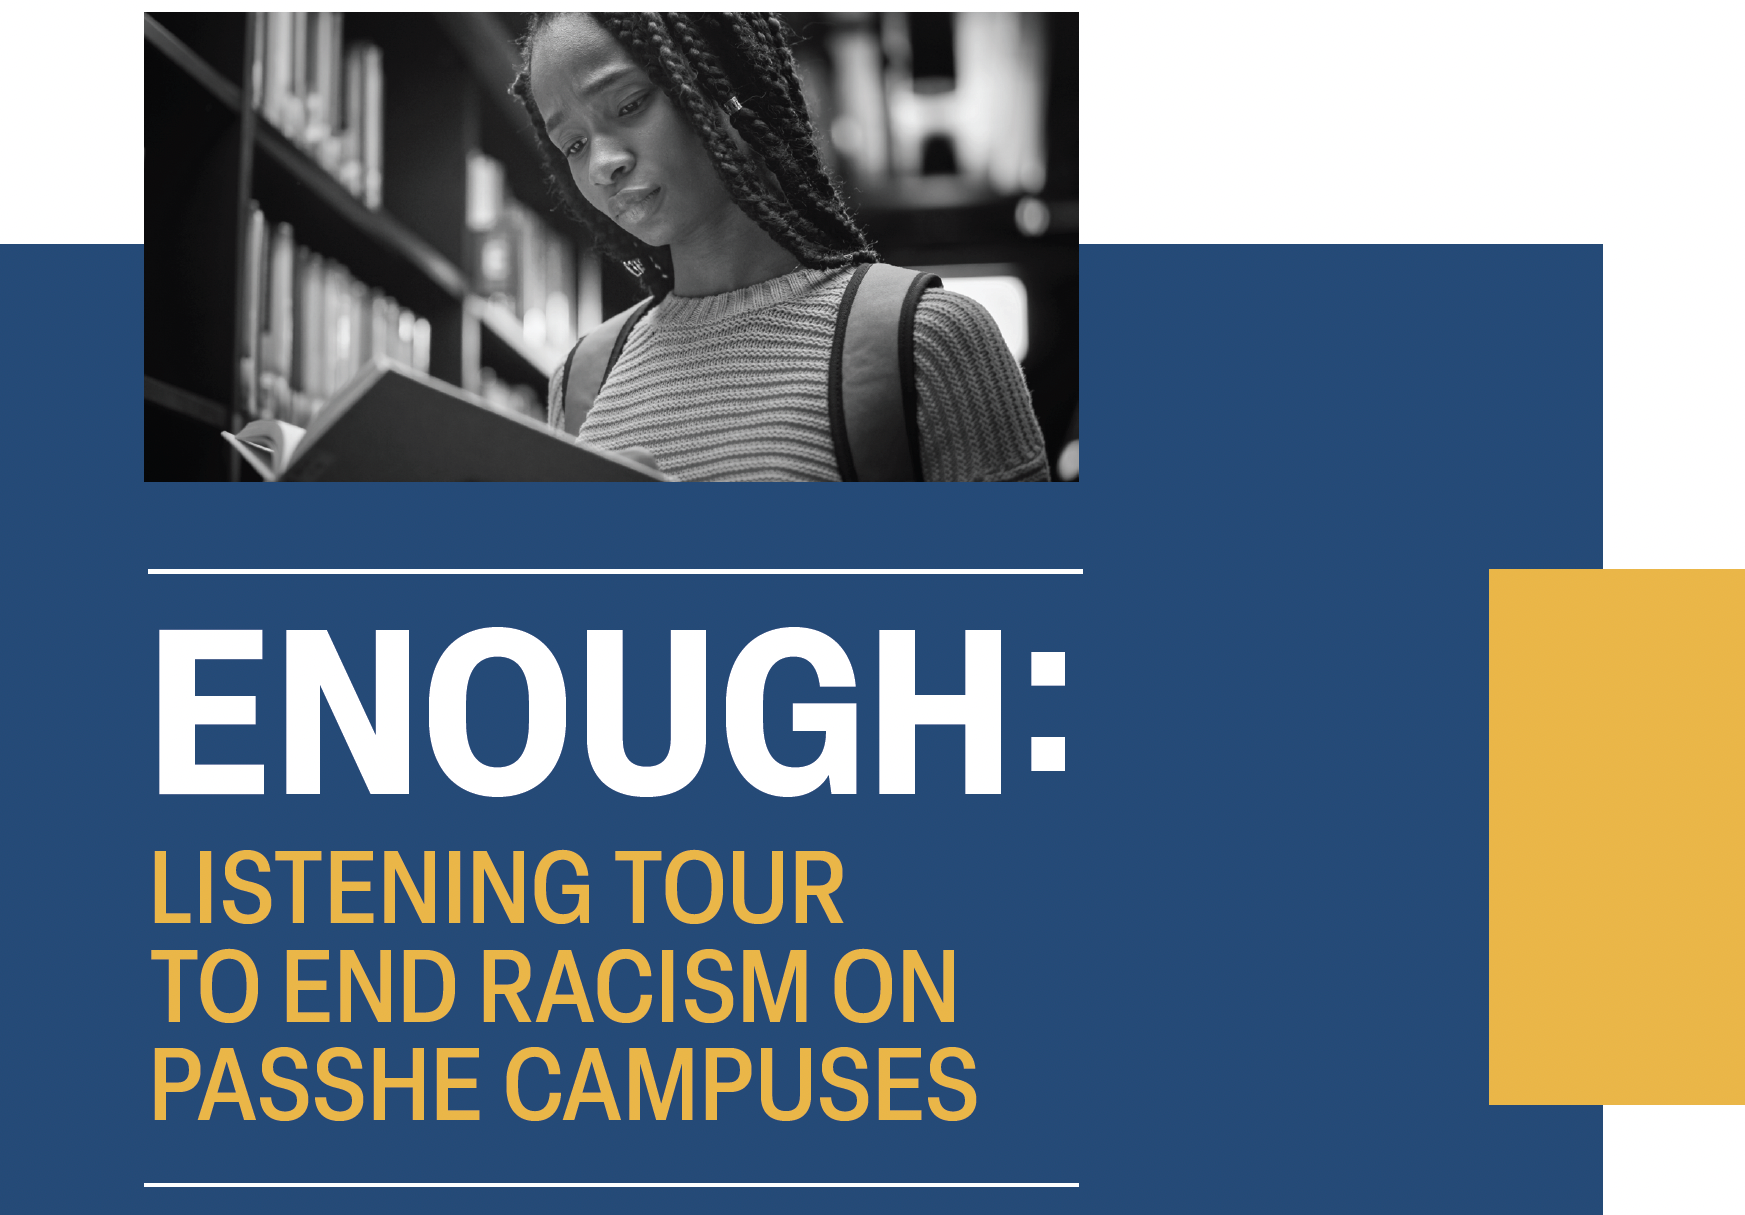 ENOUGH:<br />
LISTENING TOUR<br />
TO END RACISM ON<br />
PASSHE CAMPUSES